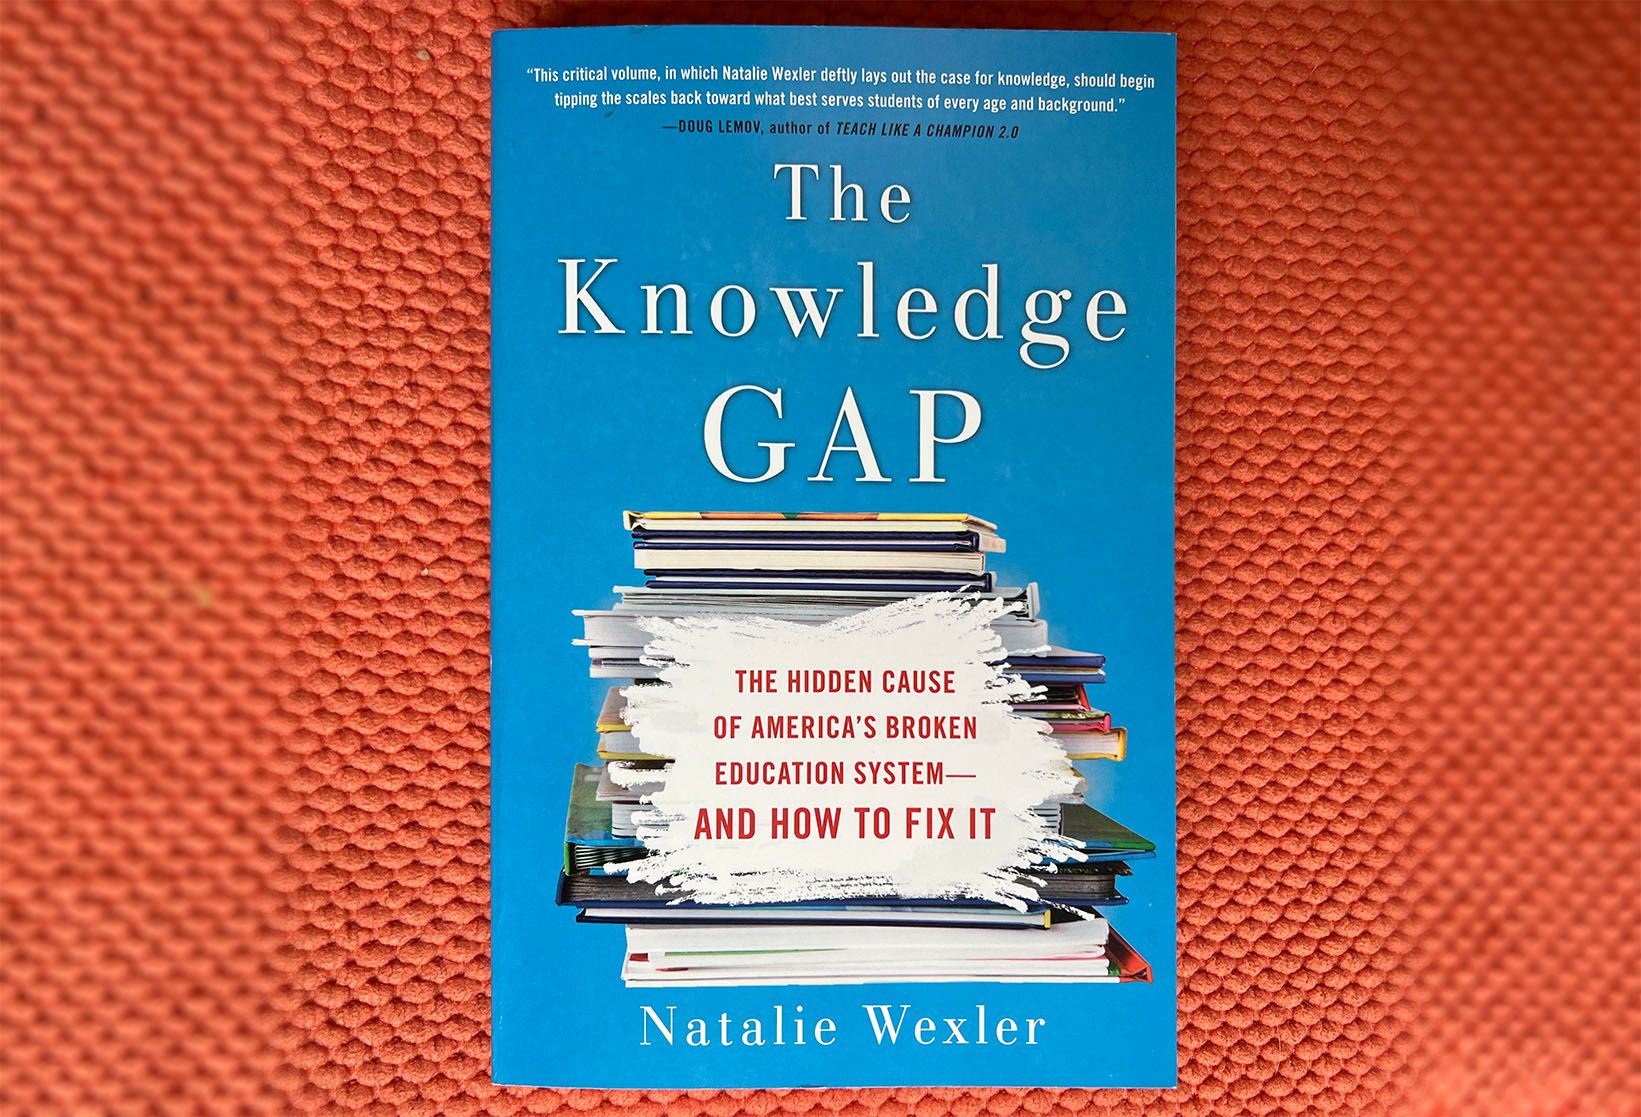 The cover of The Knowledge Gap, on an orange background.